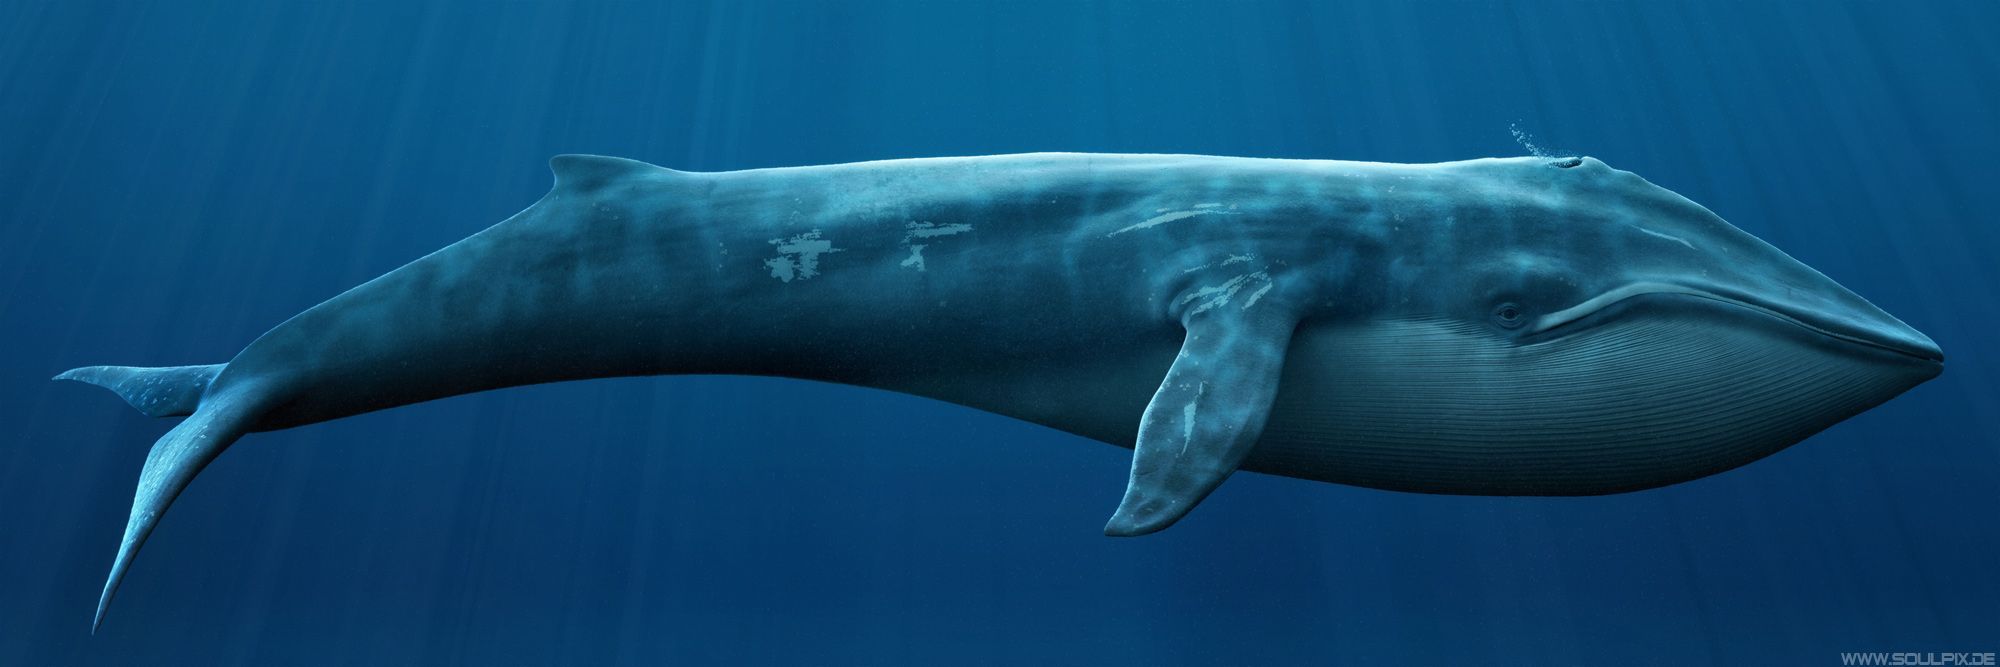 Blue Whale 6 - High Definition : Widescreen Wallpapers